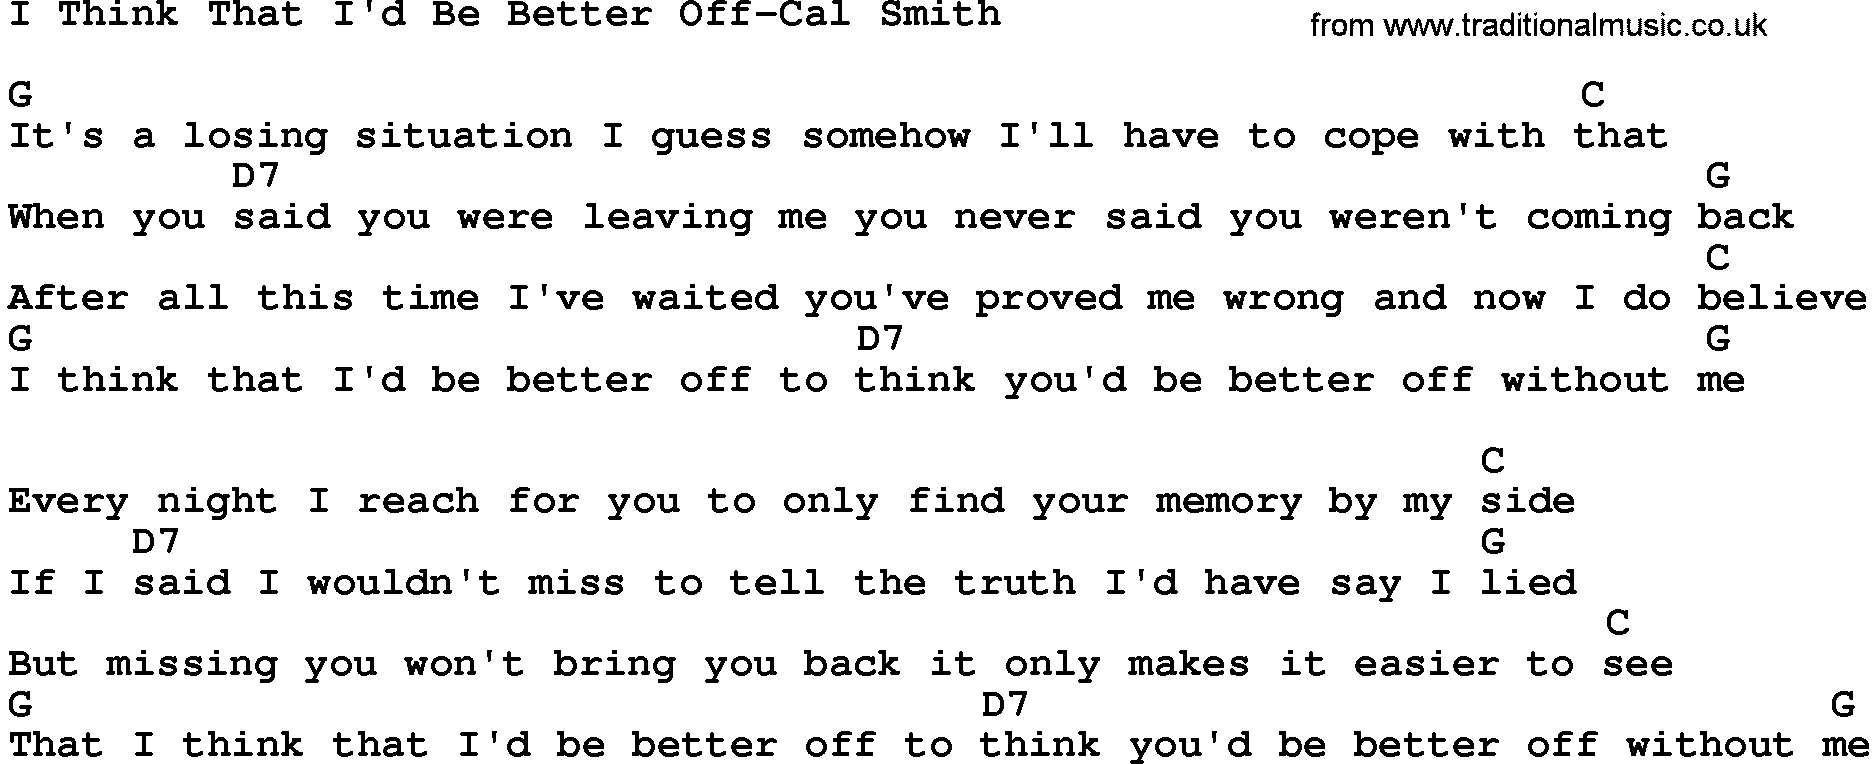 Country music song: I Think That I'd Be Better Off-Cal Smith lyrics and chords